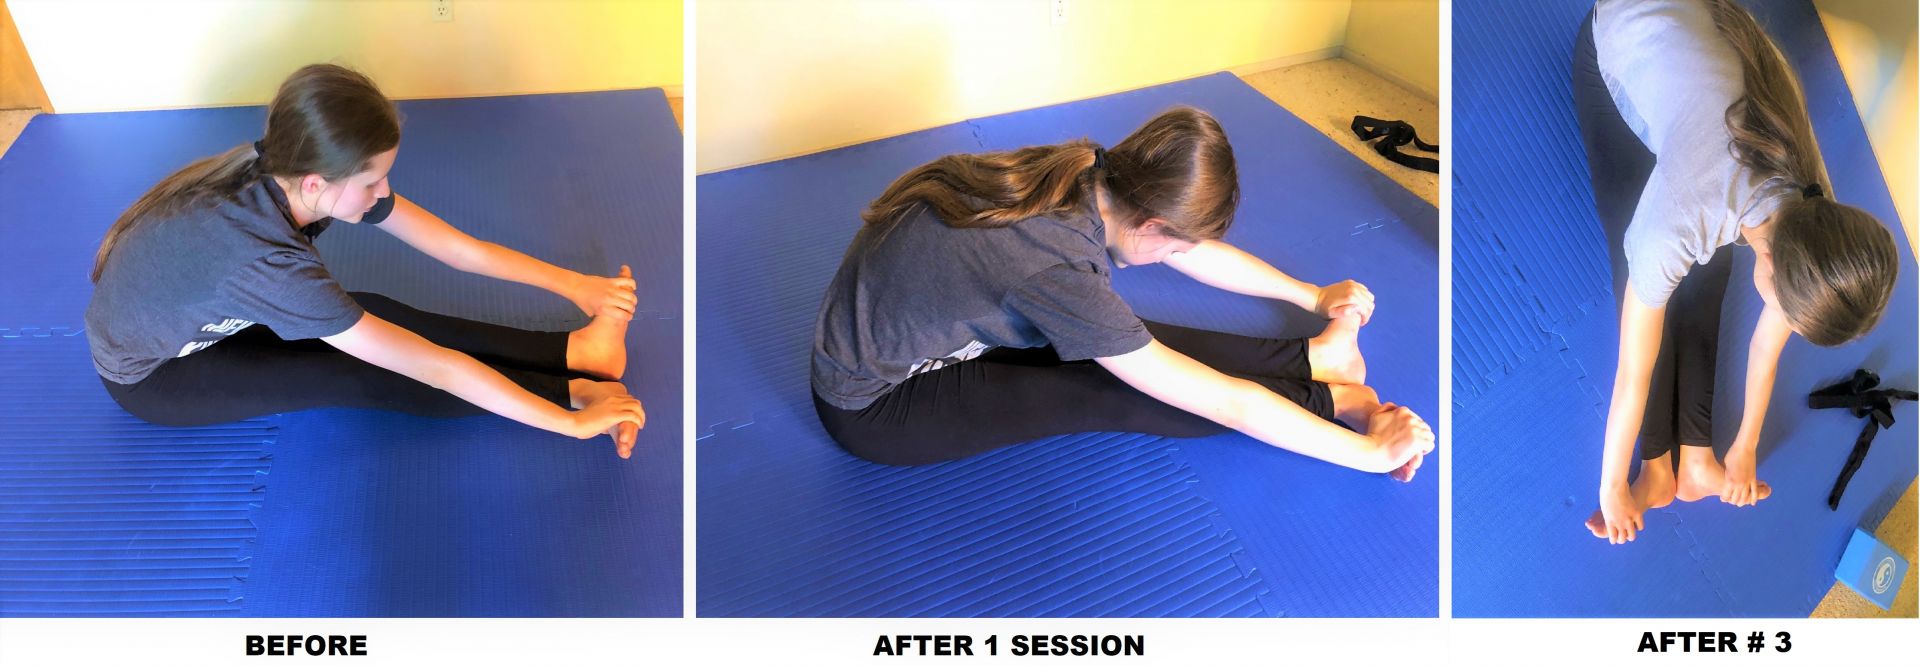 Ballet dancer shows turnout improvement sitting down legs out in front of her holding feet and turning them out during 9 minute turnout course